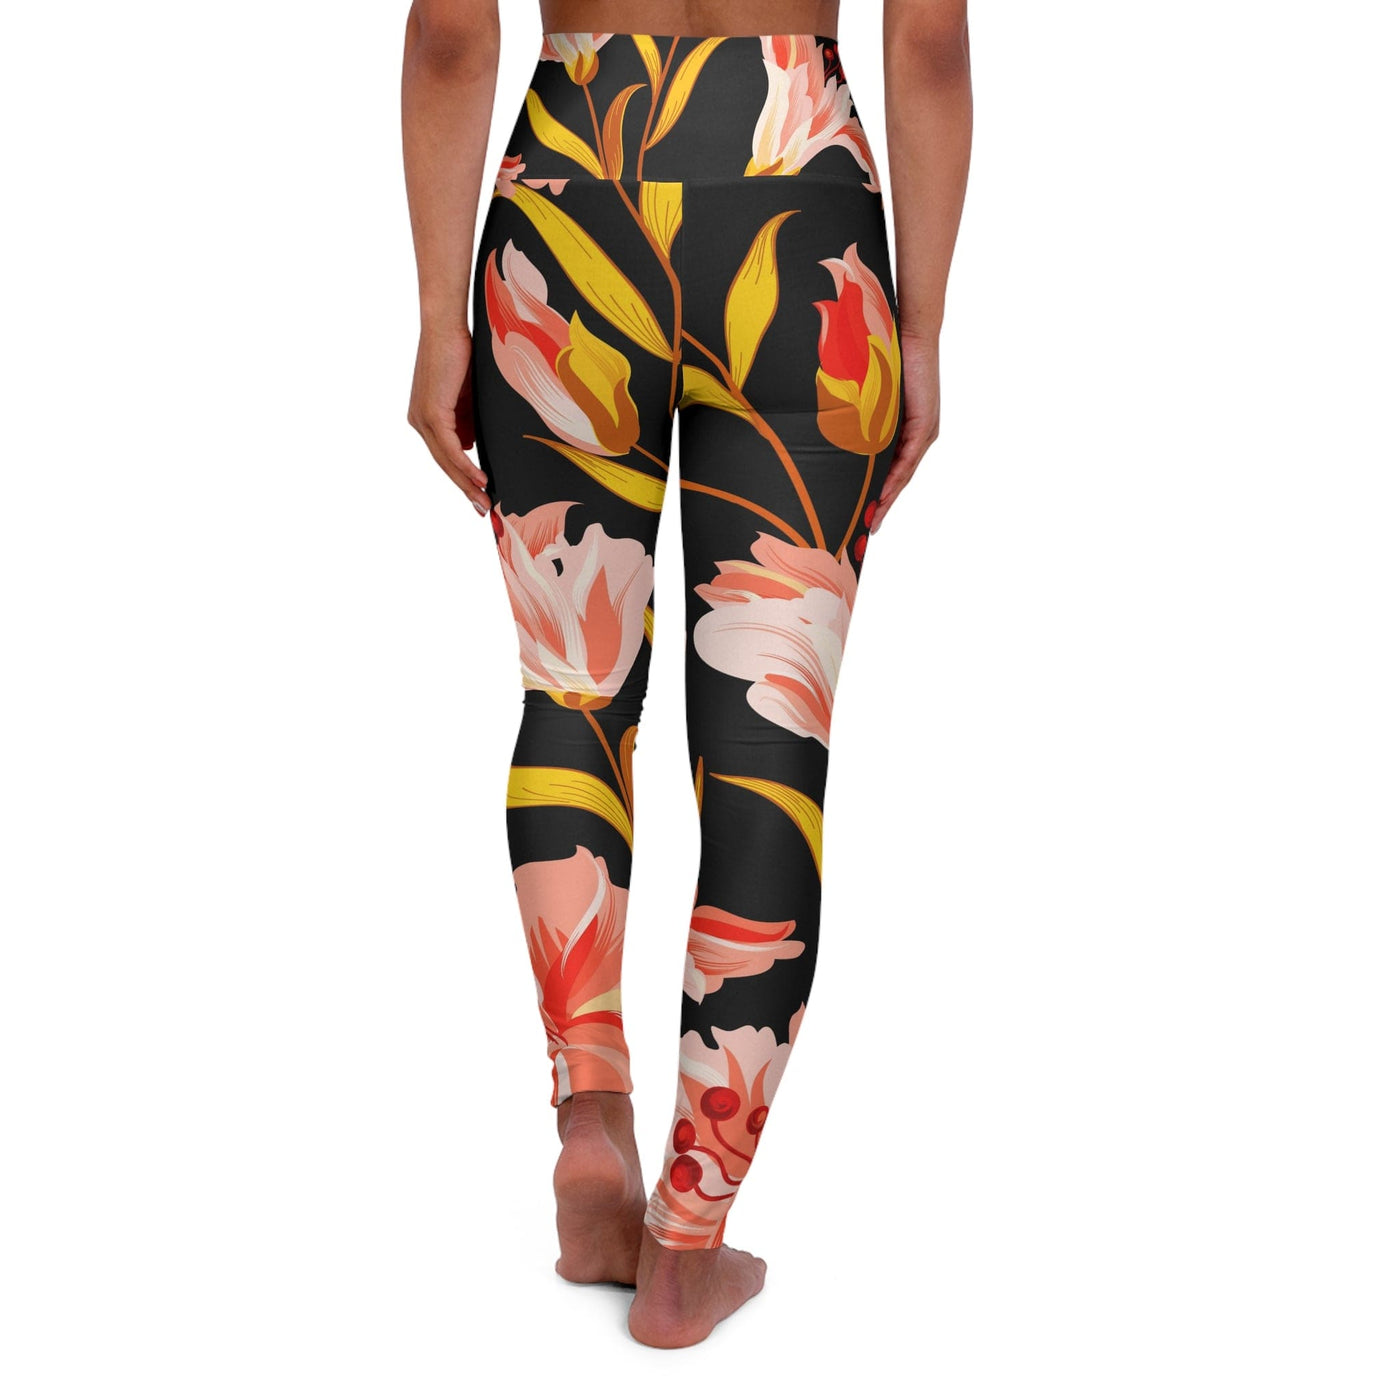 Womens High Waist Fitness Leggings Pink And Gold Floral - All Over Prints